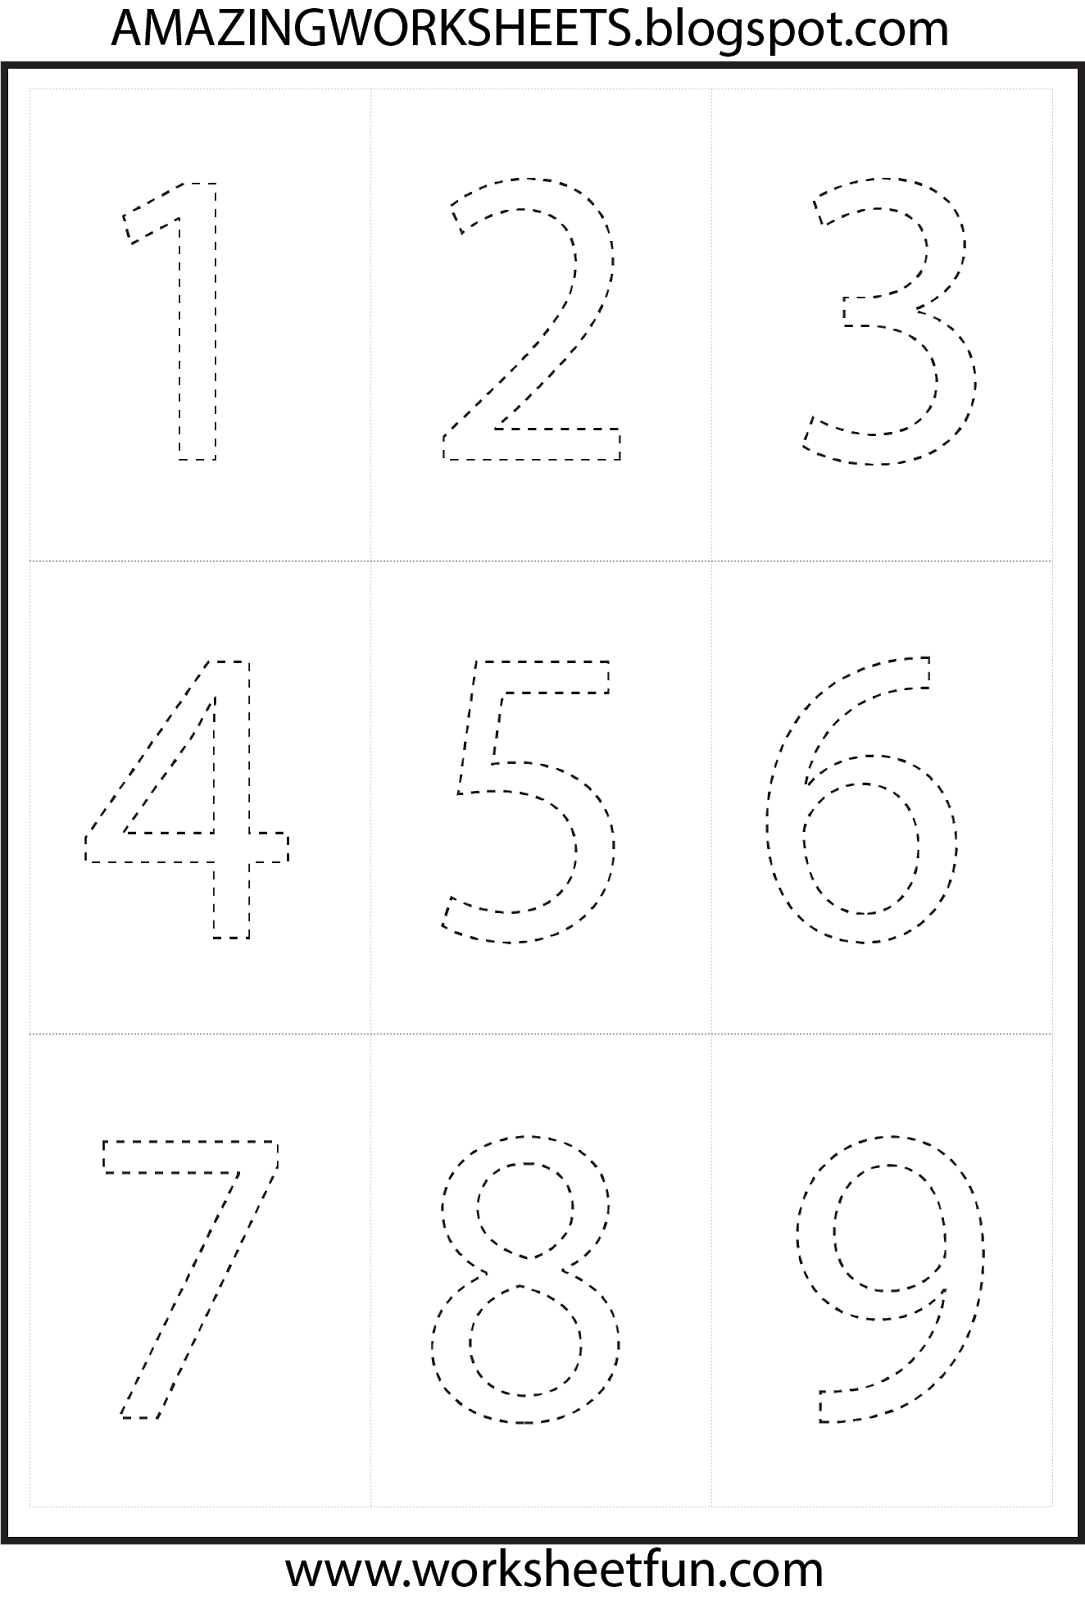 Download - Coloring number 1, 2, 3, 4, 5, 6, 7, 8, 9 and 10